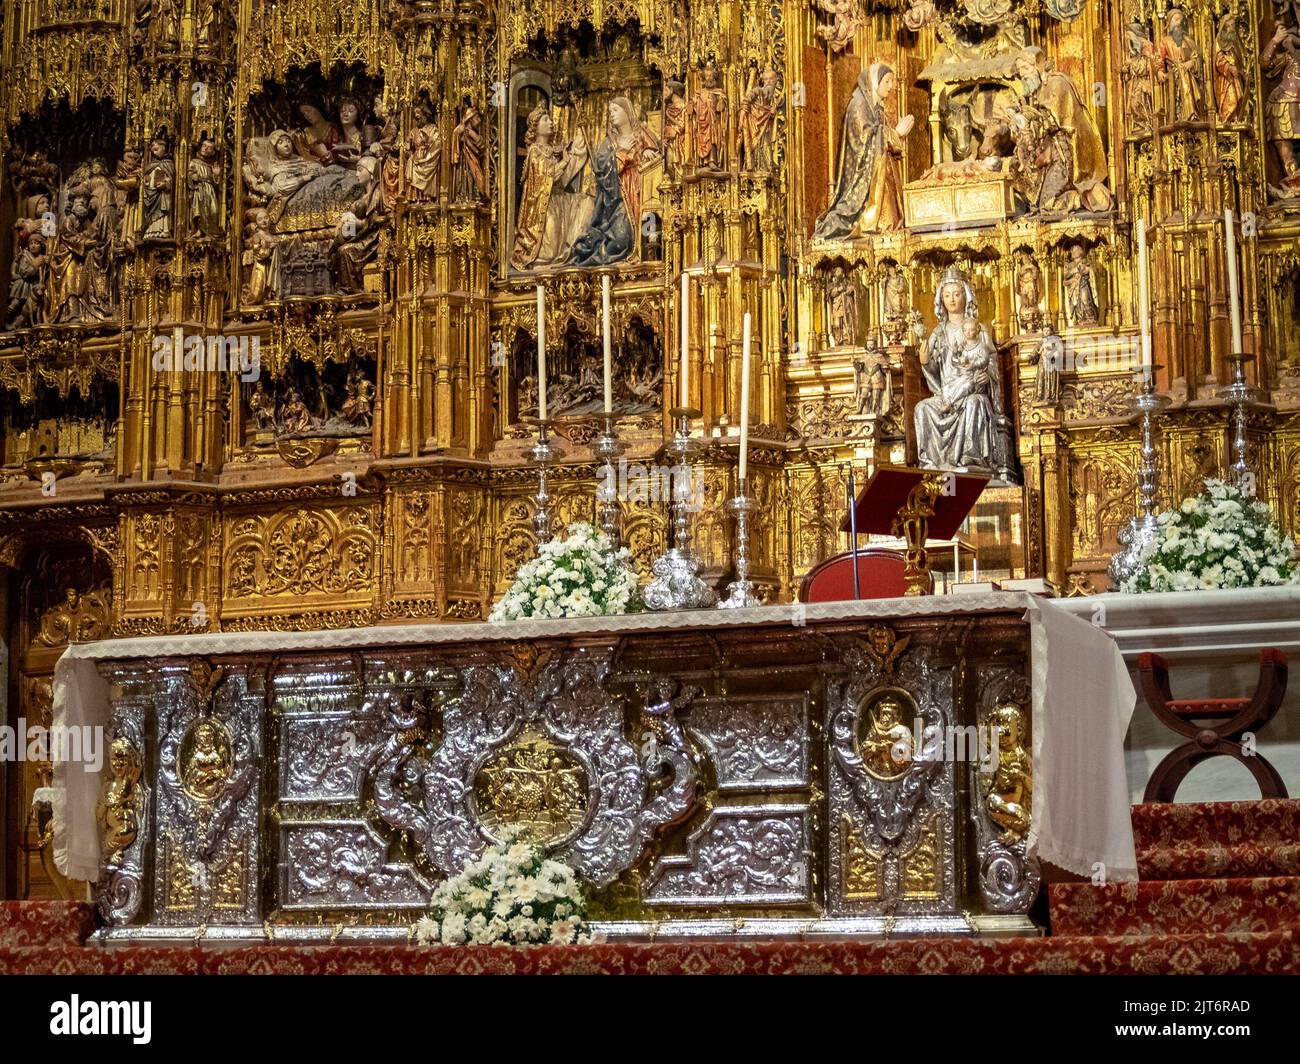 Altar of the Seville Cathedral Main Chapel Stock Photo